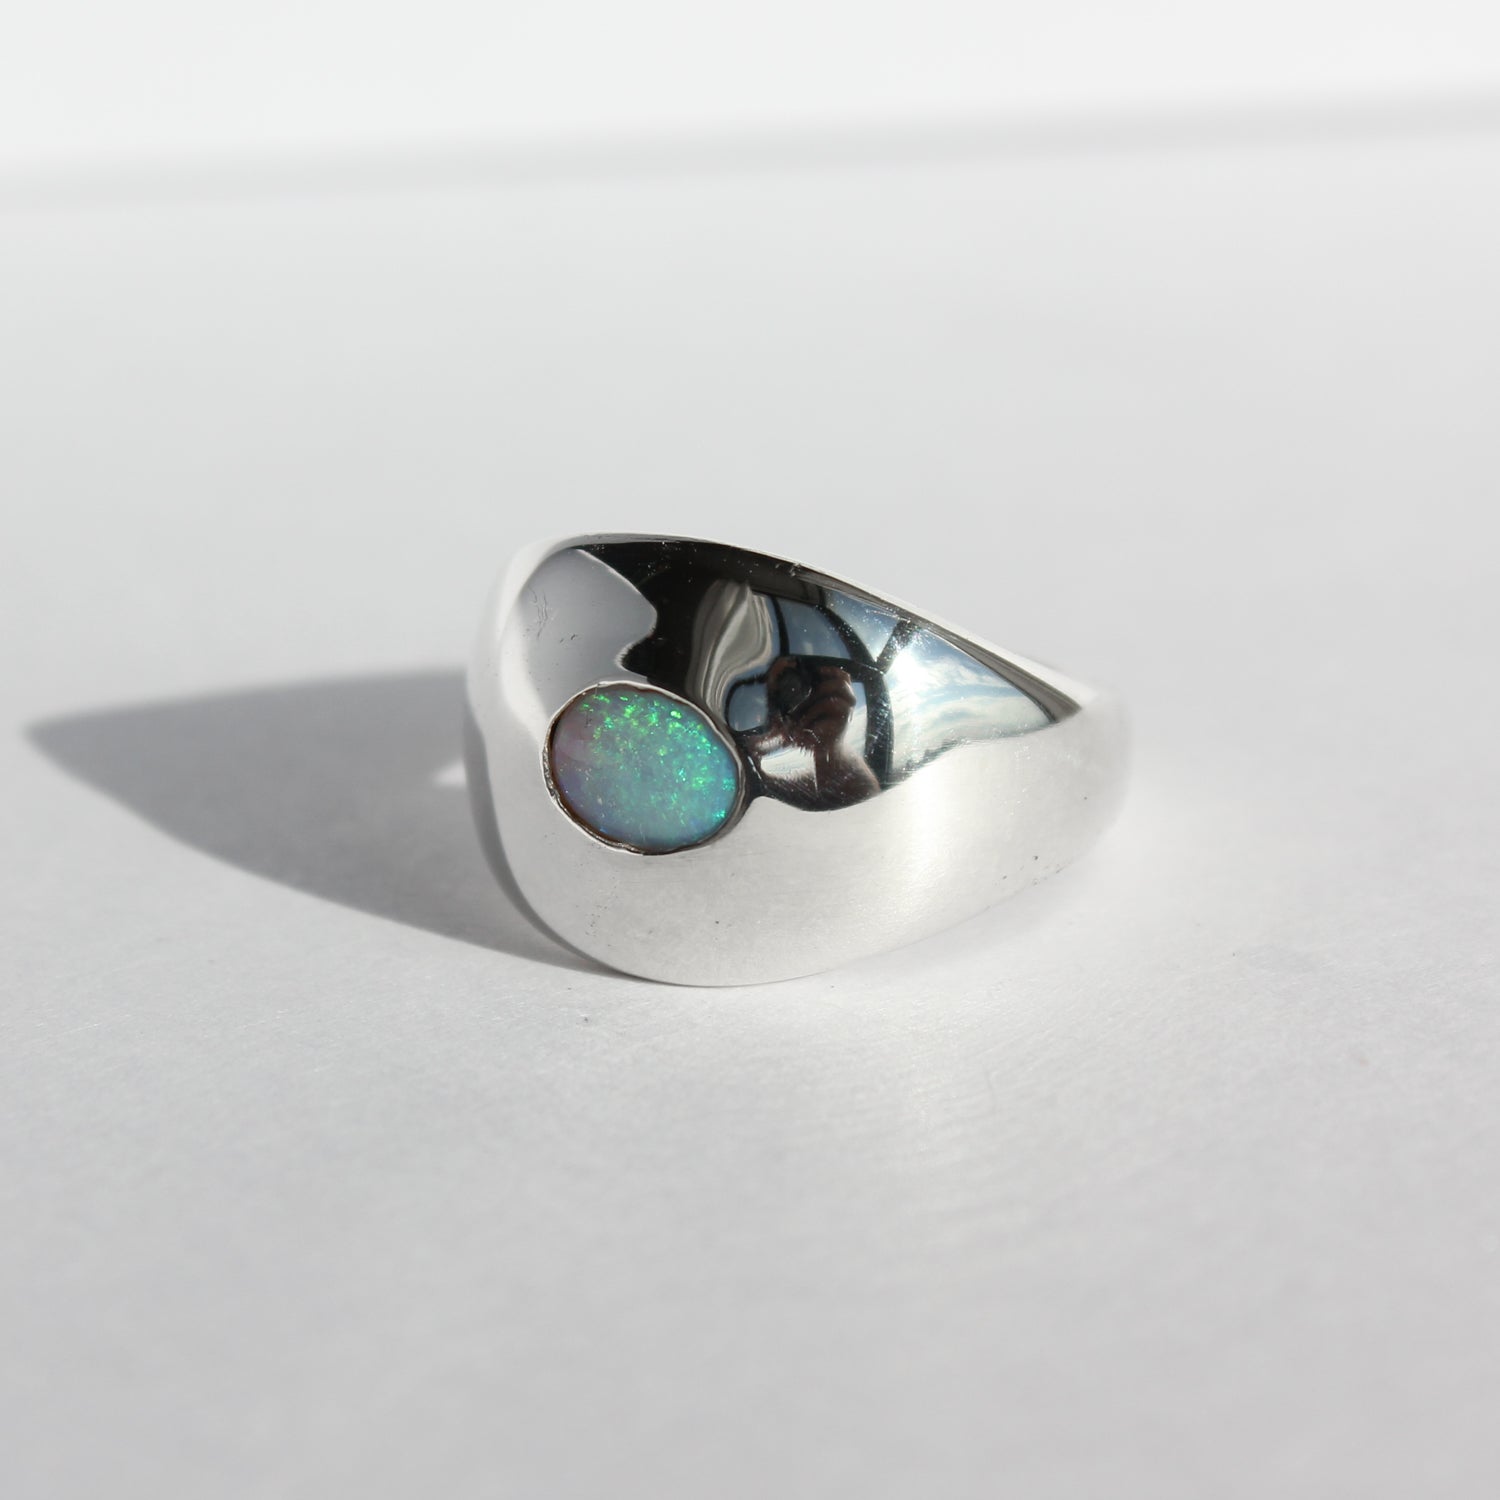 Opal Orb Ring - Size 8.5